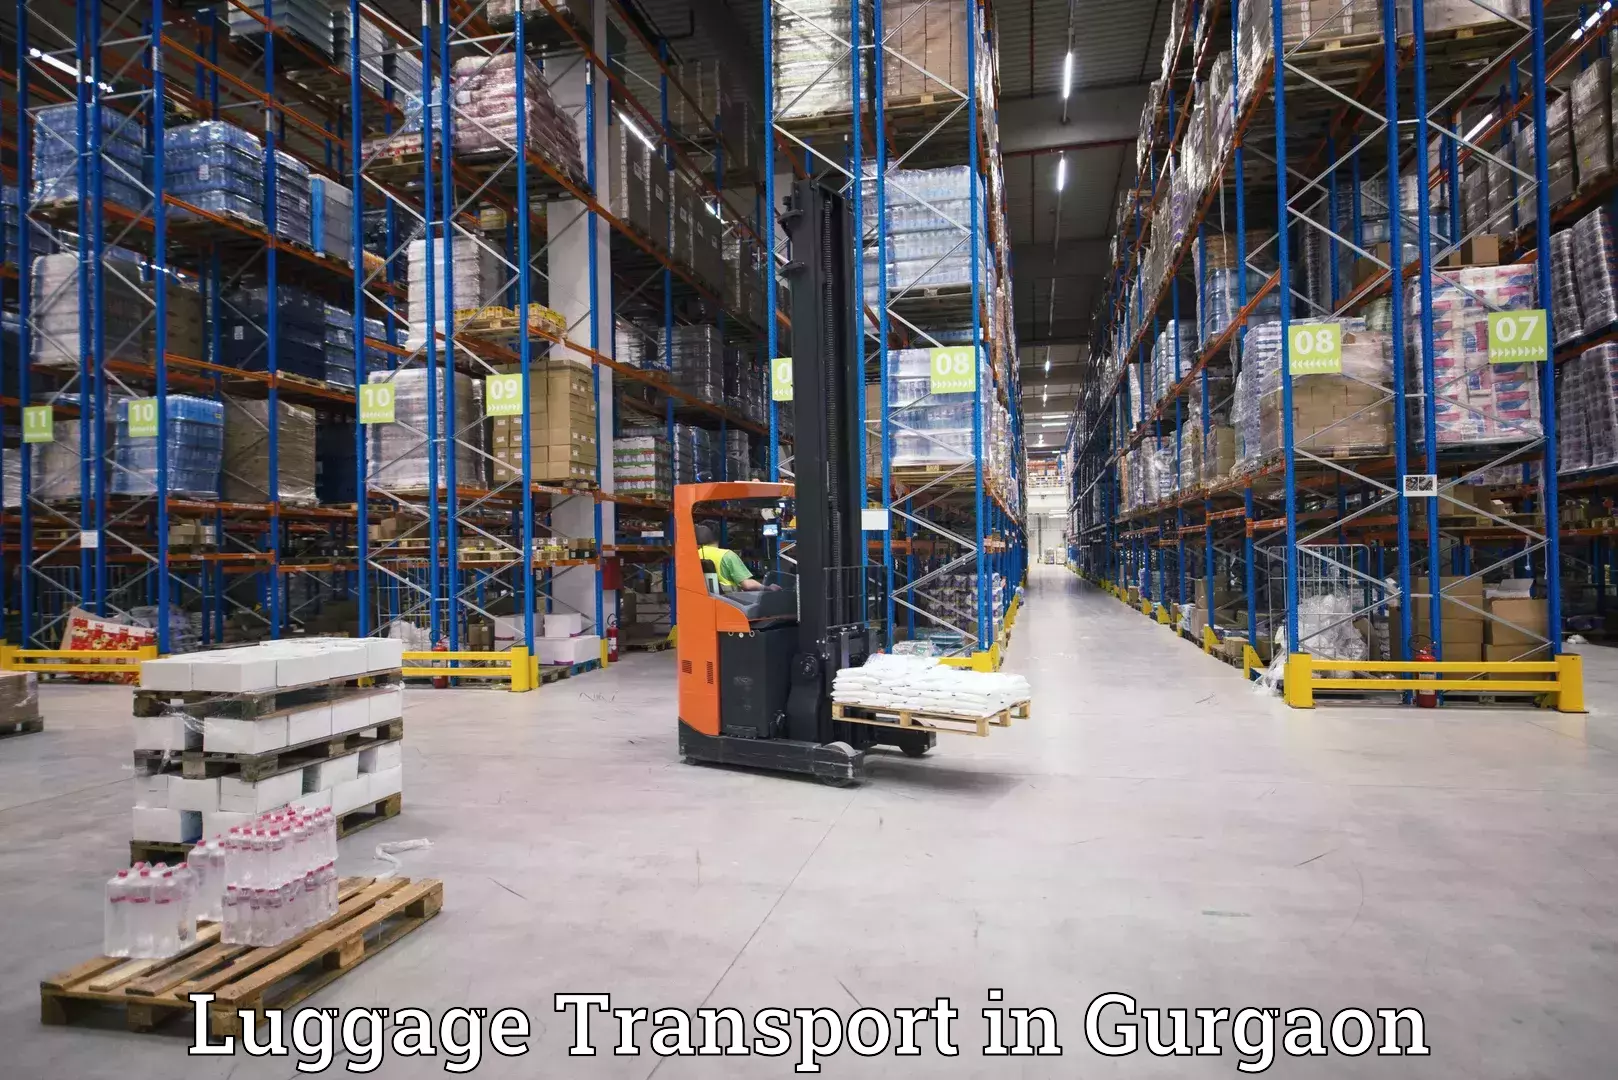 Luggage shipment specialists in Gurgaon